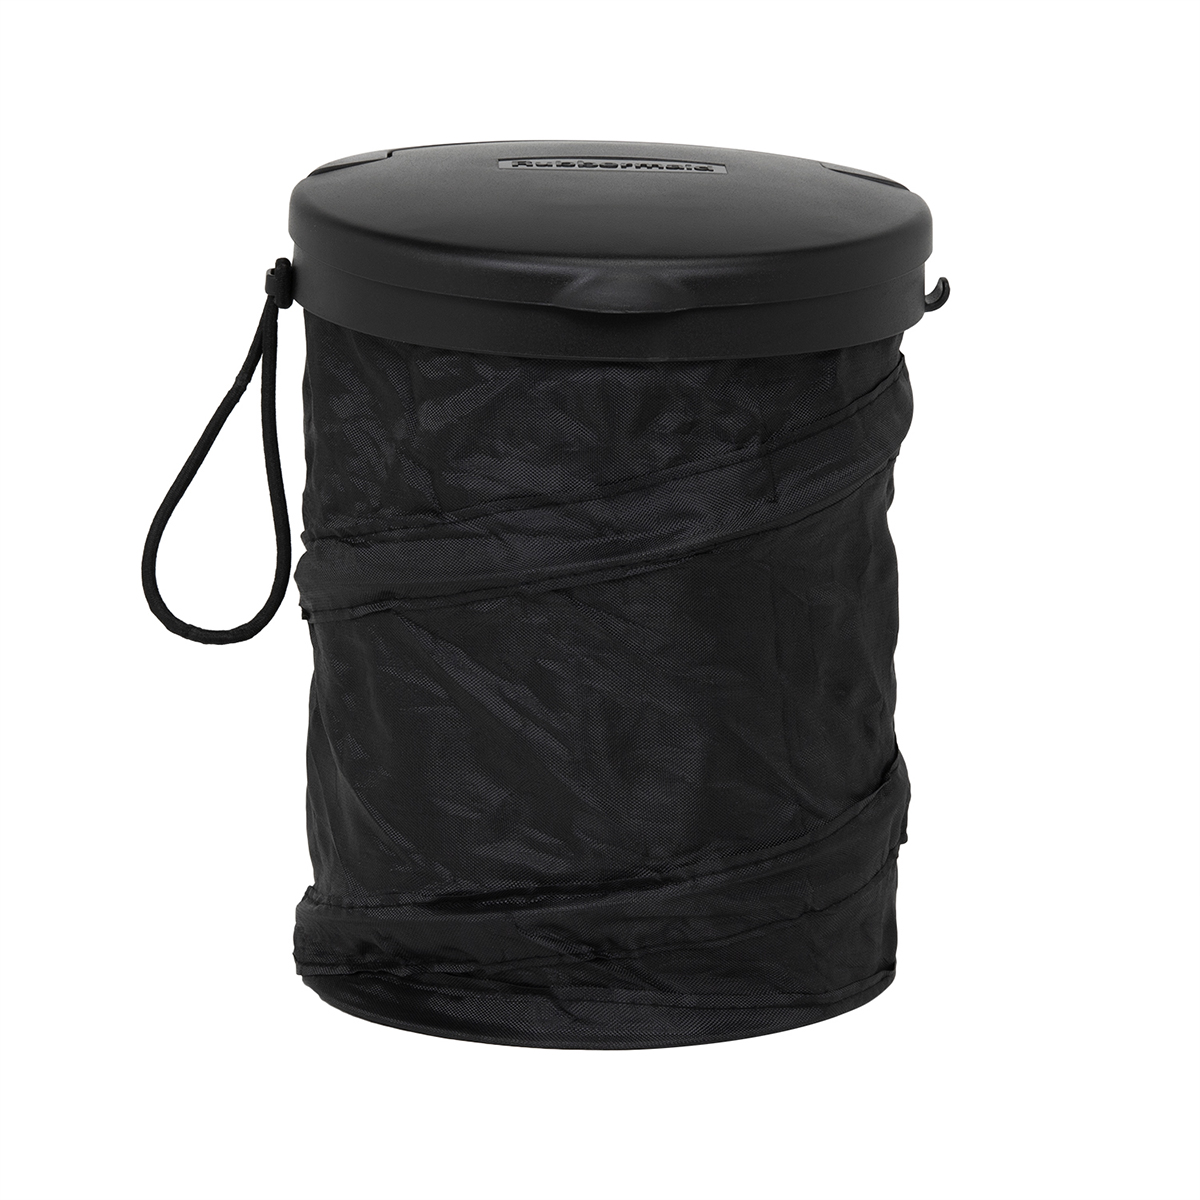 https://www.containerstore.com/catalogimages/425652/10083977-Rubbermiad-Pop-Up-Trash-VEN.jpg